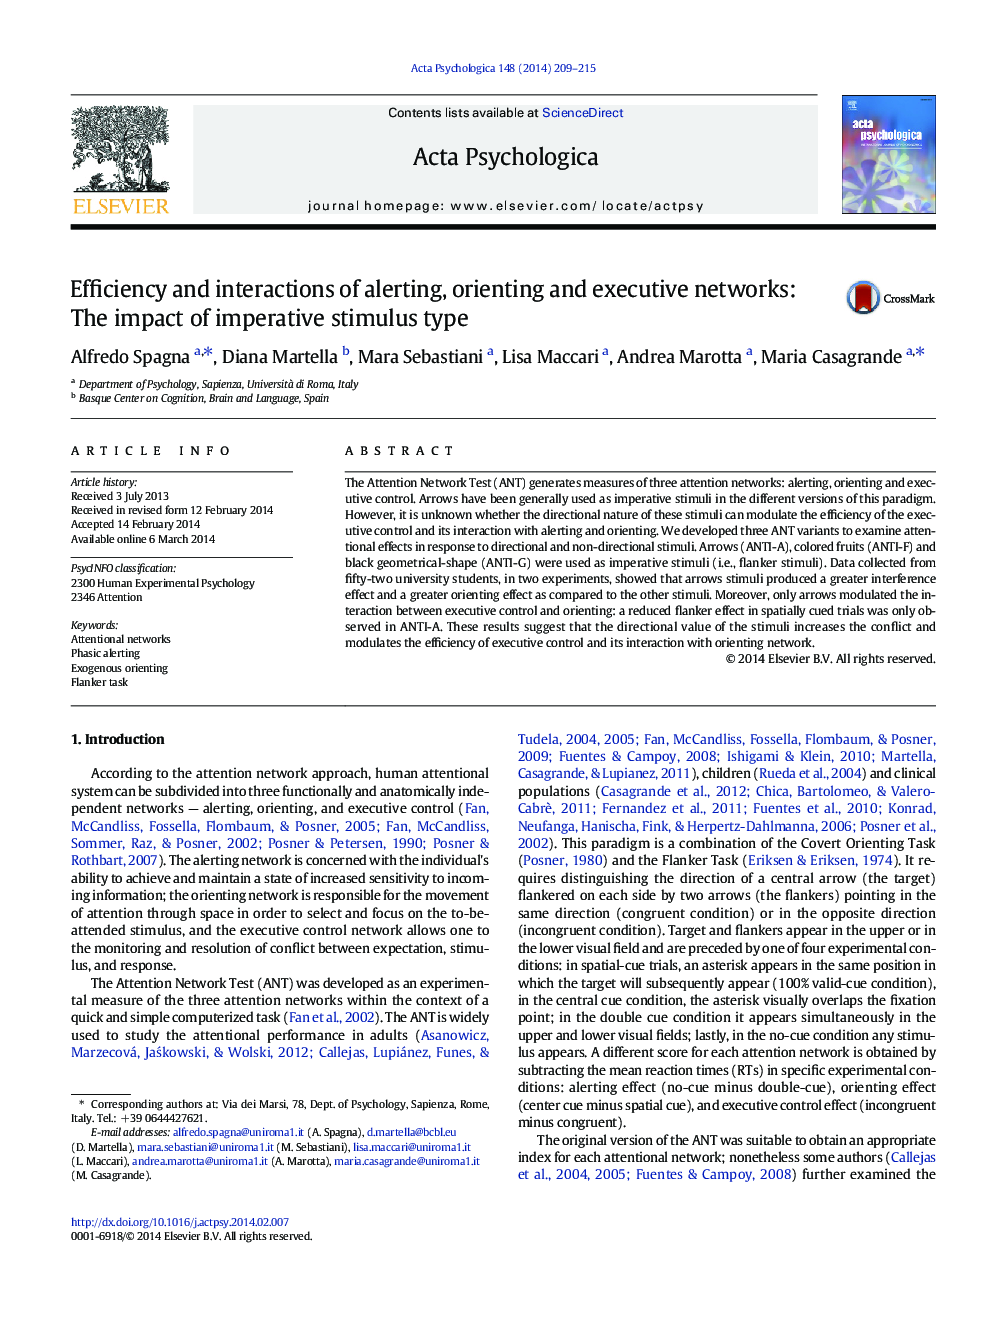 Efficiency and interactions of alerting, orienting and executive networks: The impact of imperative stimulus type